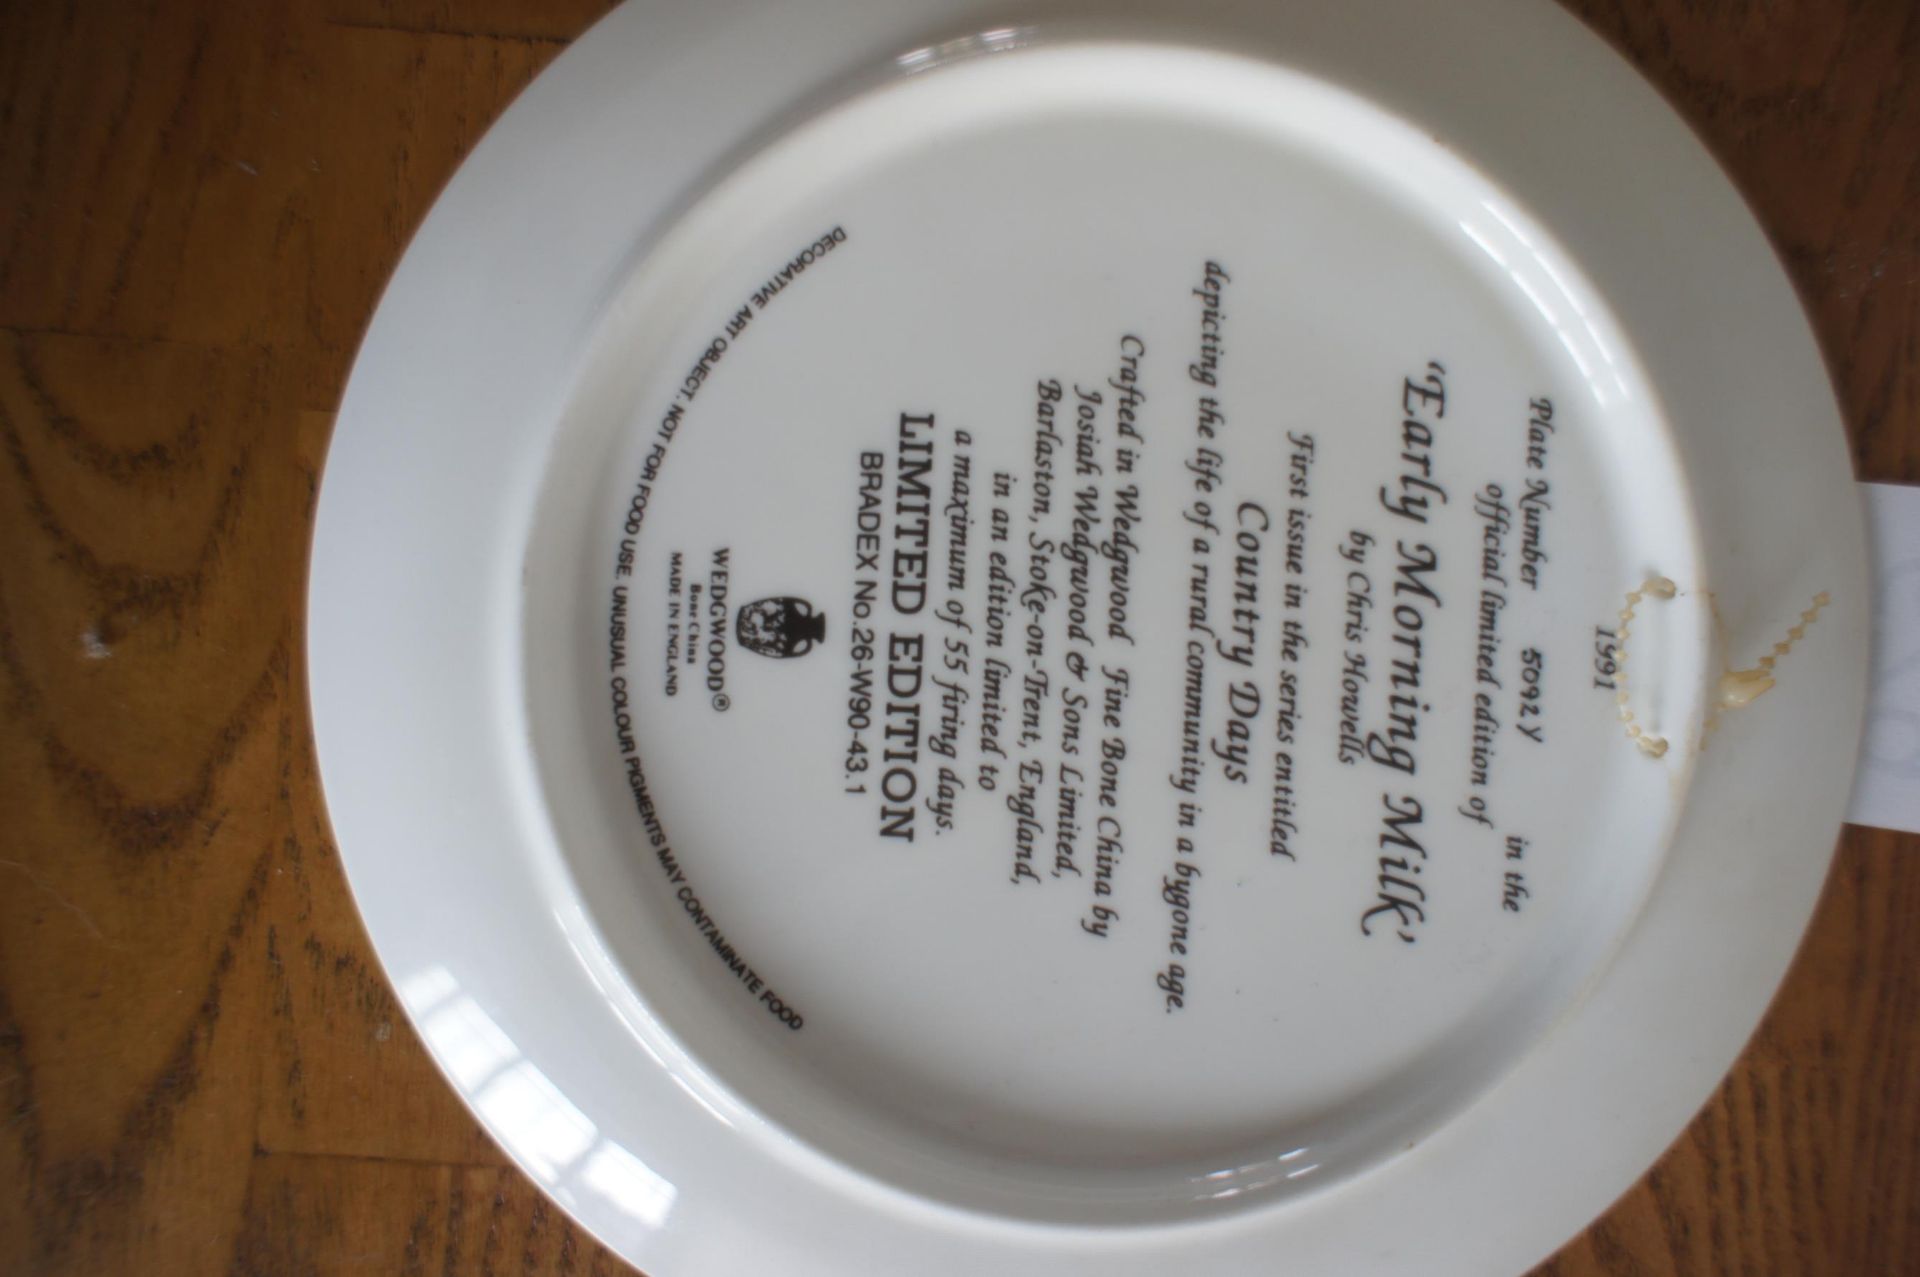 Wedgewood “Early Morning Milk” limited addition plate - Image 4 of 4